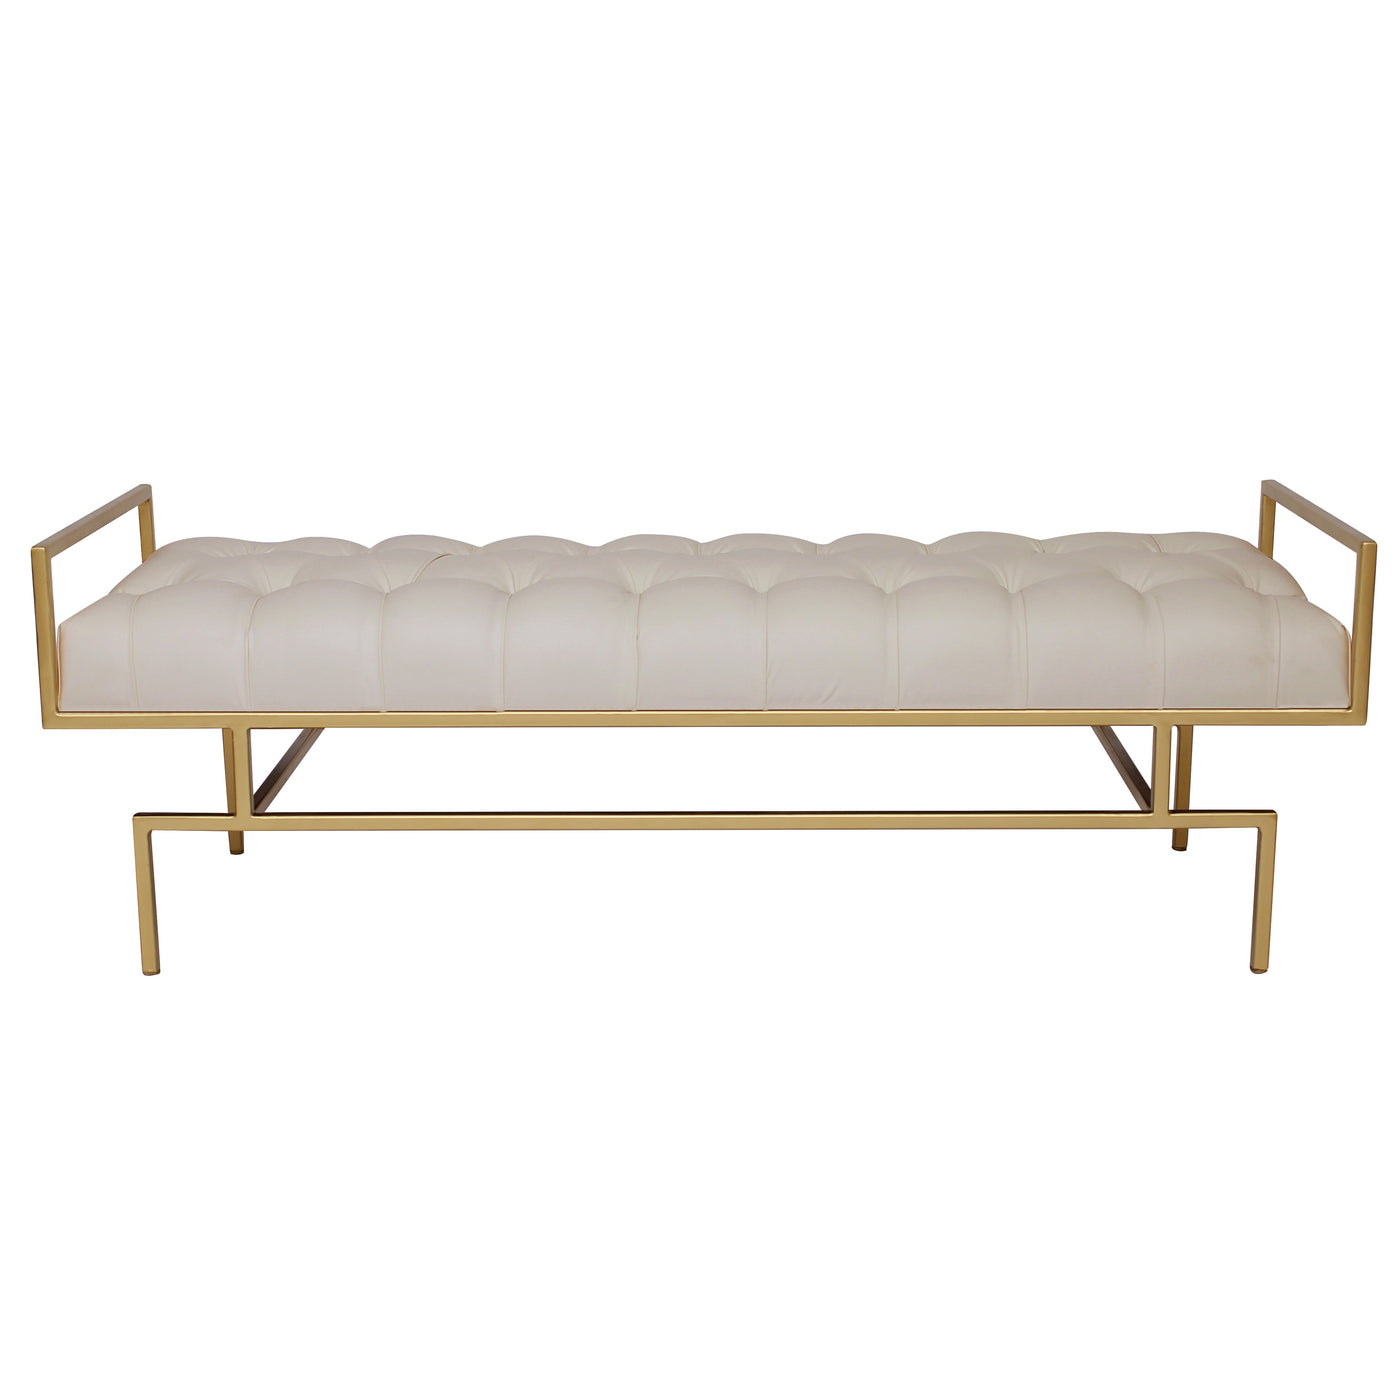 A contemporary metal golden bench with modern styled legs, topped with a white leather tufted cushion